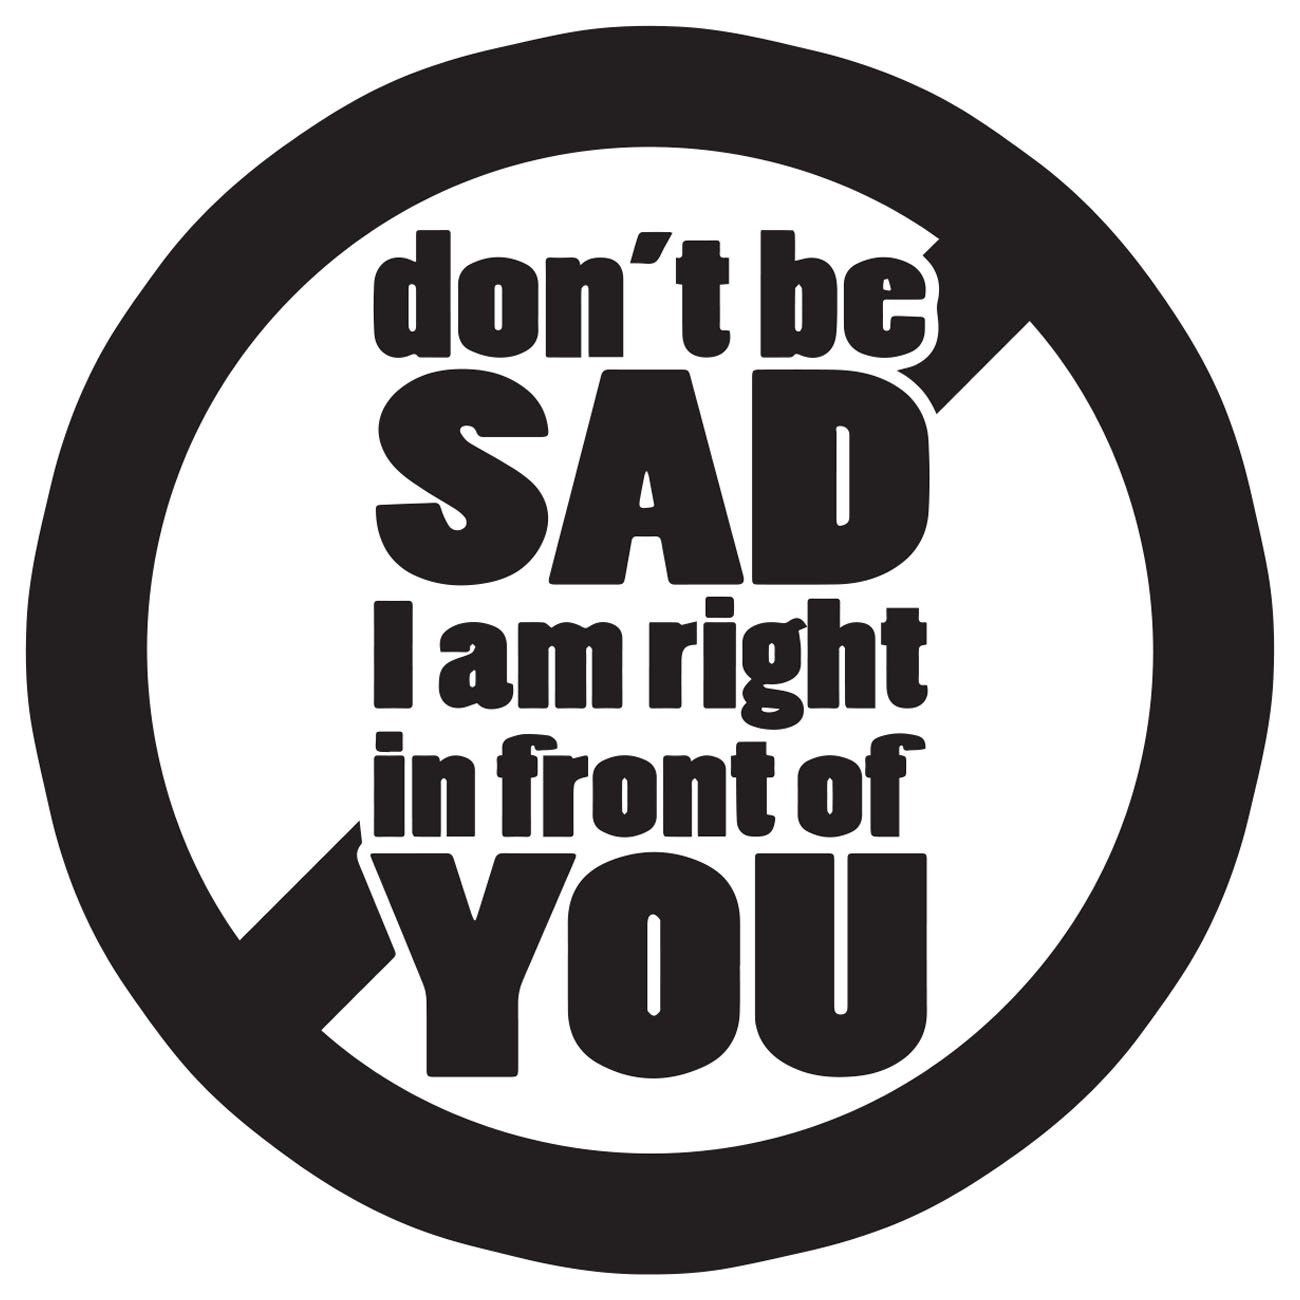 Dont be sad - I am right in front of you